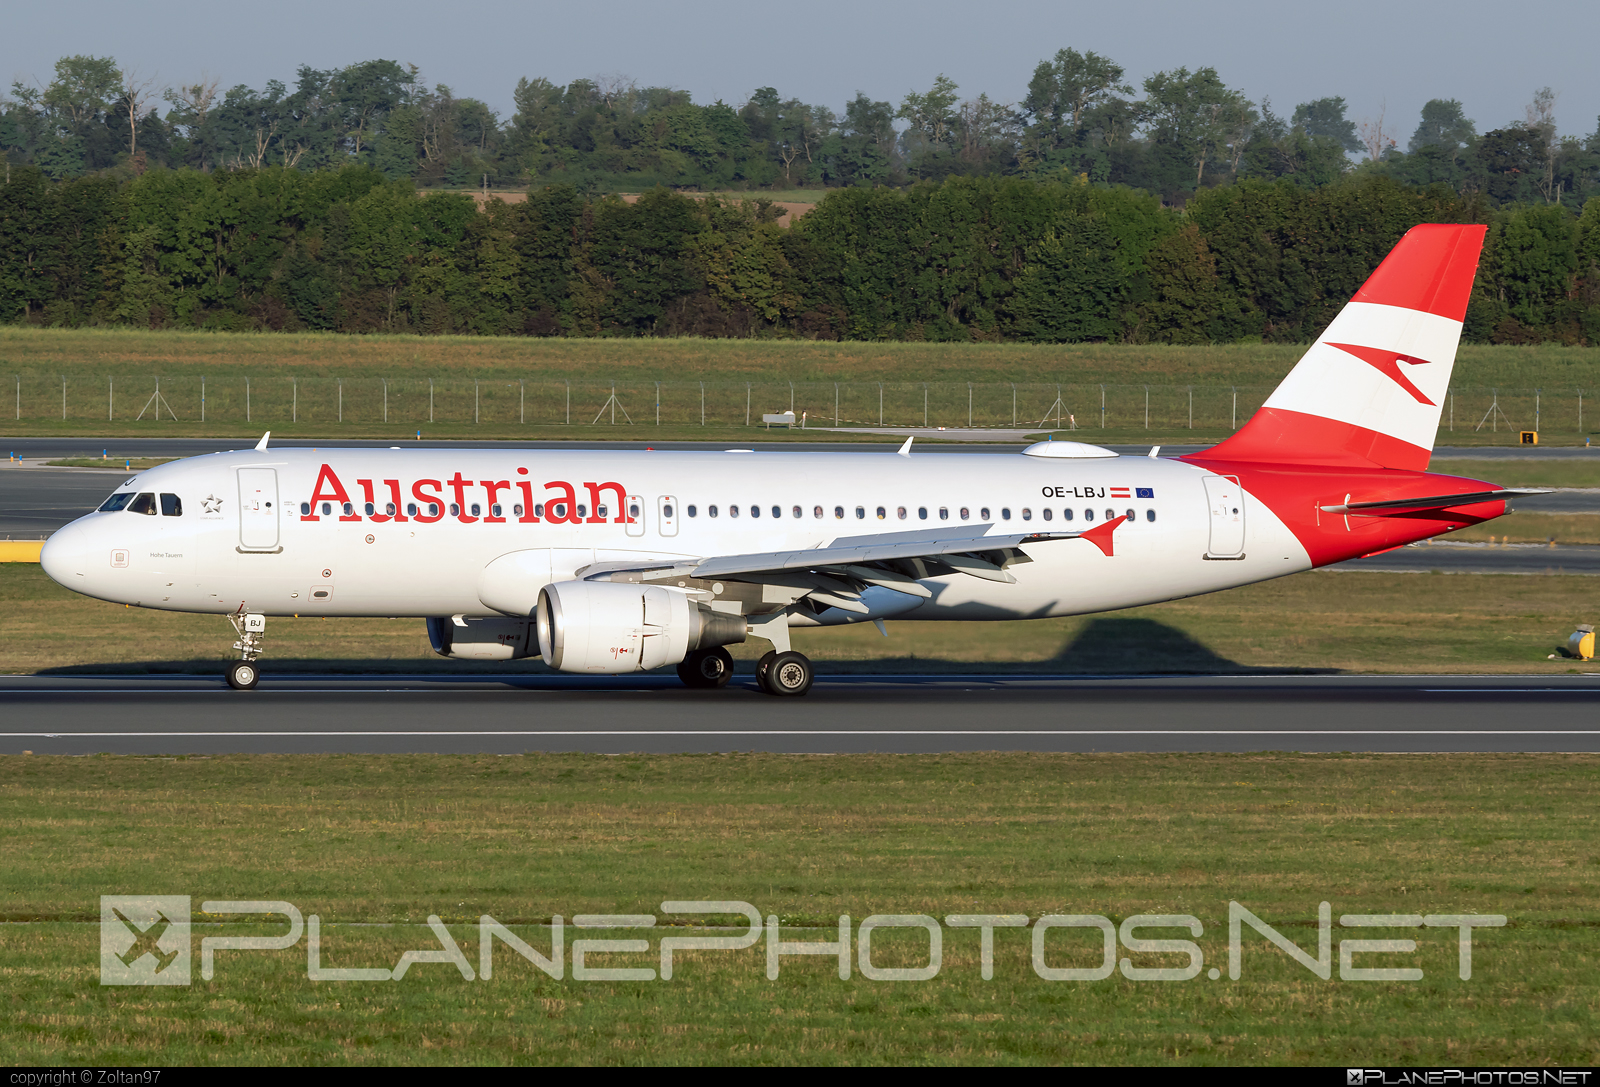 Airbus A320-214 - OE-LBJ operated by Austrian Airlines #a320 #a320family #airbus #airbus320 #austrian #austrianAirlines